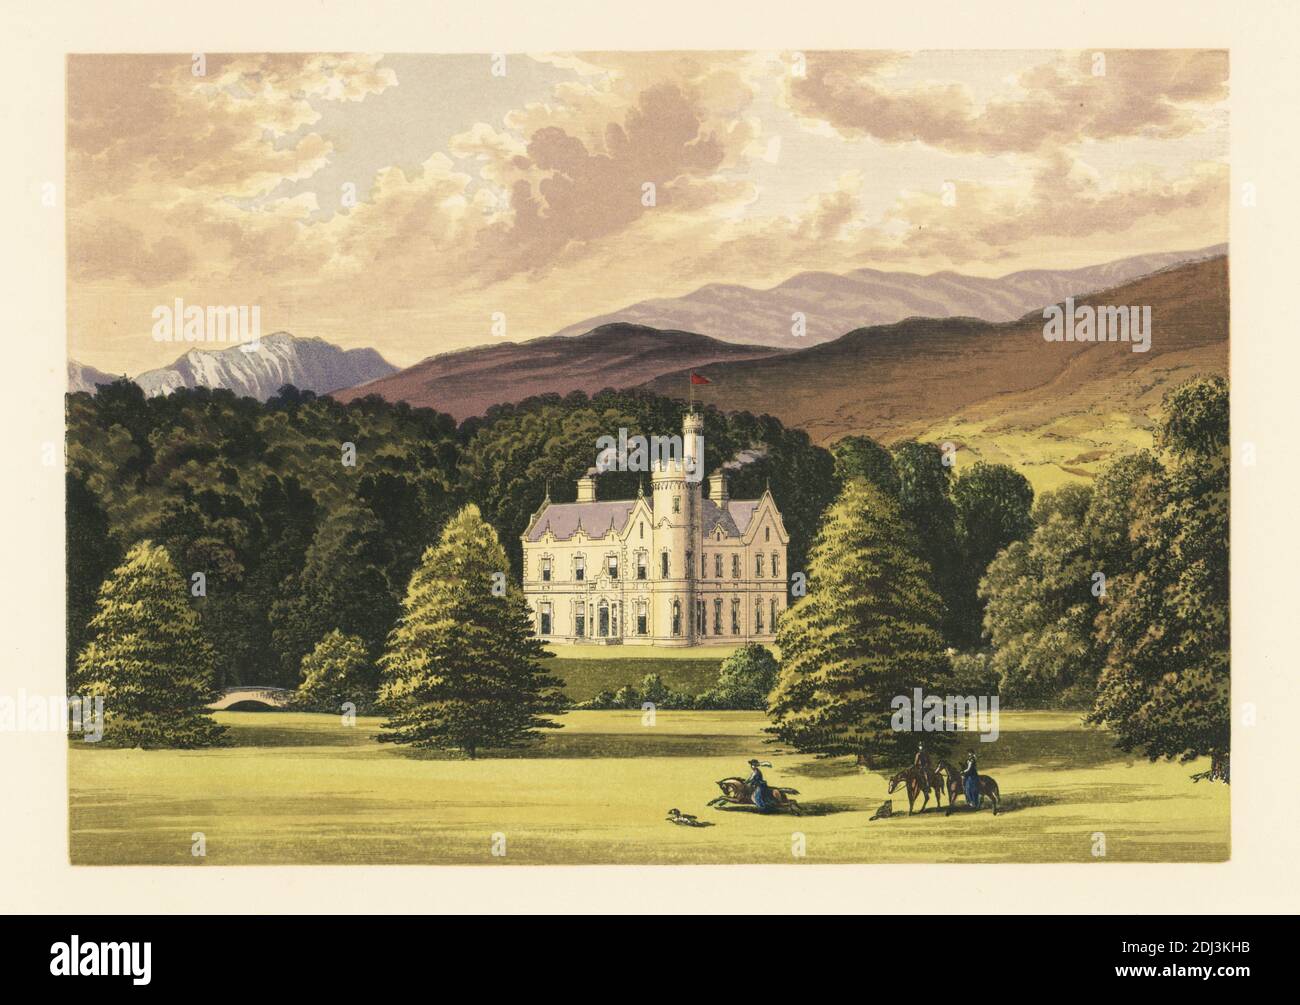 Ardtully, County Kerry, Ireland. Scottish-Baronial style mansion house with circular tower built in 1847 for Sir Richard John Theodore Orpen on the site of an old castle. Colour woodblock by Benjamin Fawcett in the Baxter process of an illustration by Alexander Francis Lydon from Reverend Francis Orpen Morris’s Picturesque Views of the Seats of Noblemen and Gentlemen of Great Britain and Ireland, William Mackenzie, London, 1880. Stock Photo